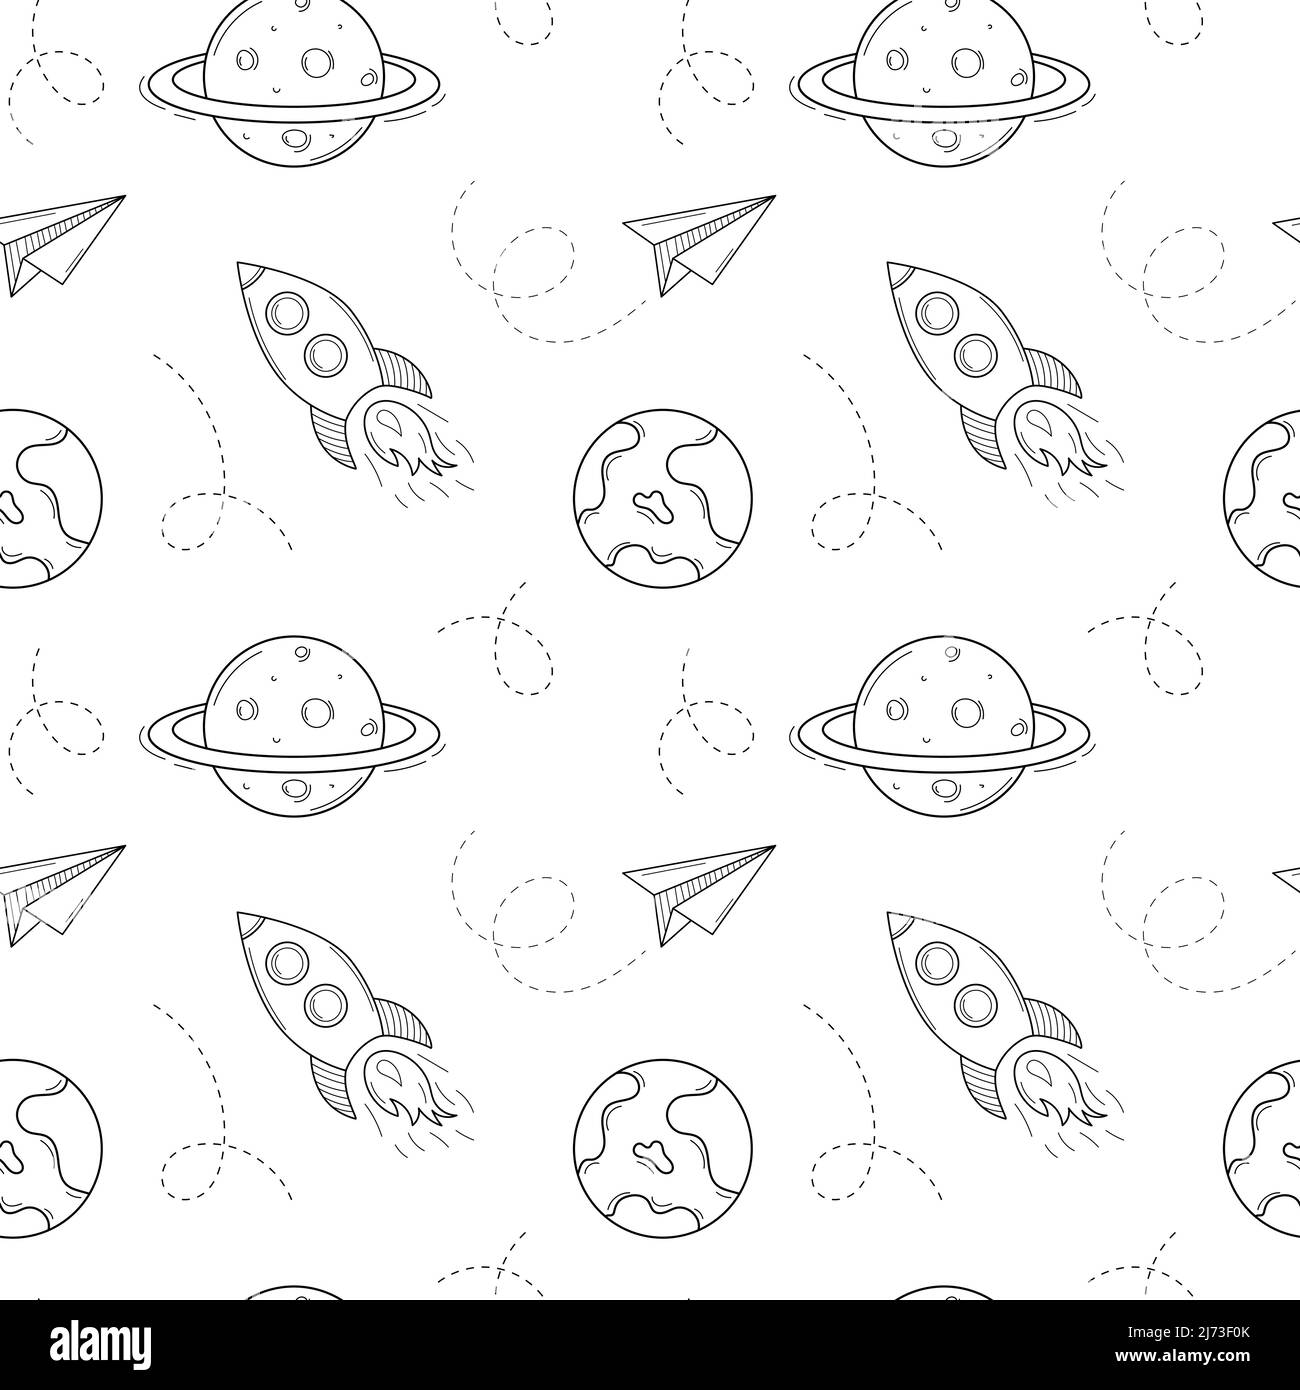 A simple school seamless pattern with a spaceship, rocket, planet, Earth, Saturn, paper airplane. Black and white background with isolated hand-drawn Stock Vector